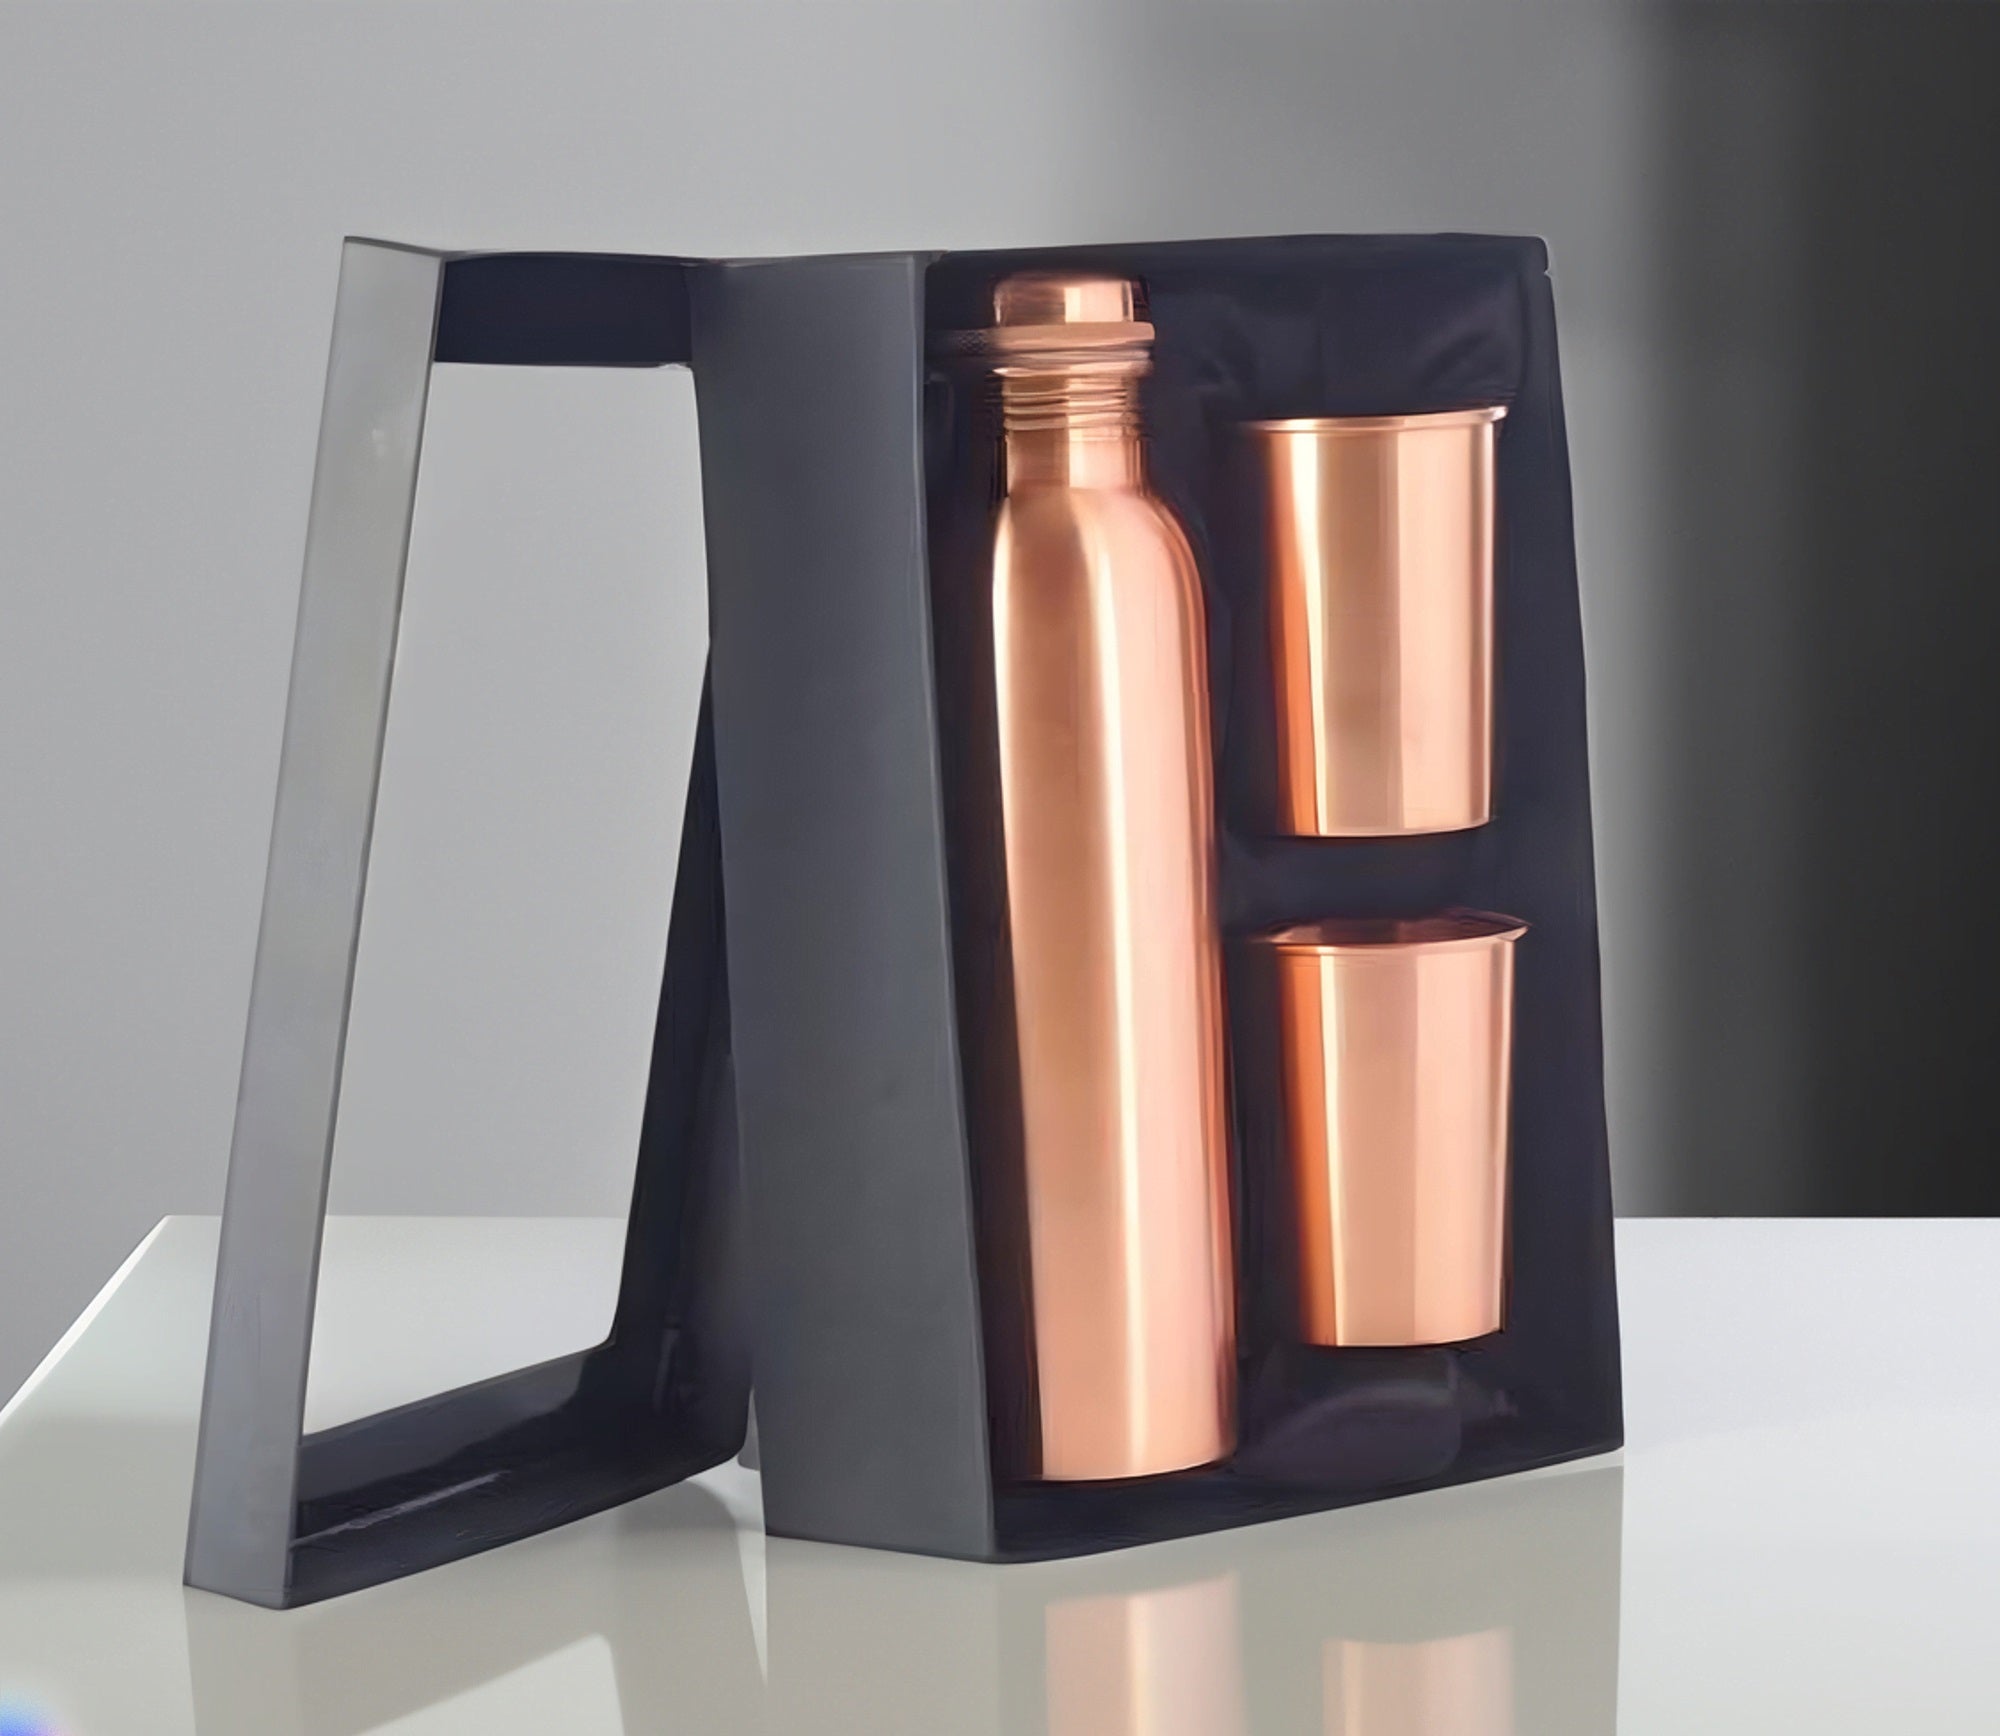 Copper Baba - COPPER BABA ™ -Copper Bottle Gift Set Pure Copper Water Bottle  1000 ml with 4 Glasses (300ml Each) and Copper diya for Gifting Purpose  |Corporate Gift |Marriage Gift Concept |